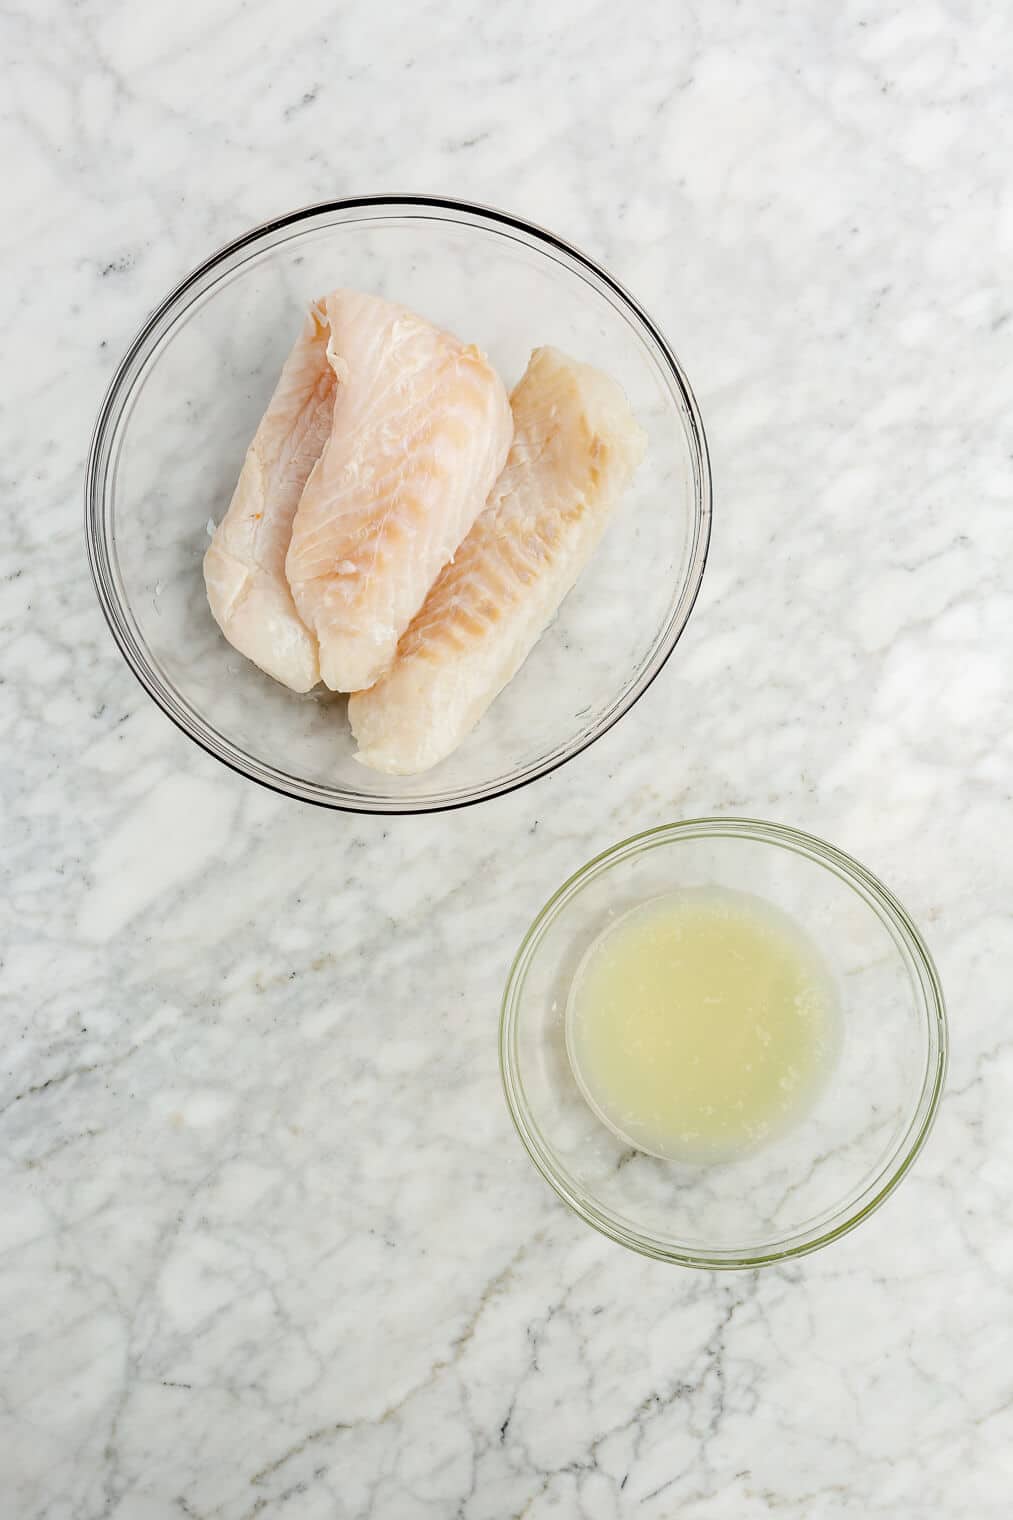 Cod in a large glass bowl next to a smaller glass bowl in lime juice.